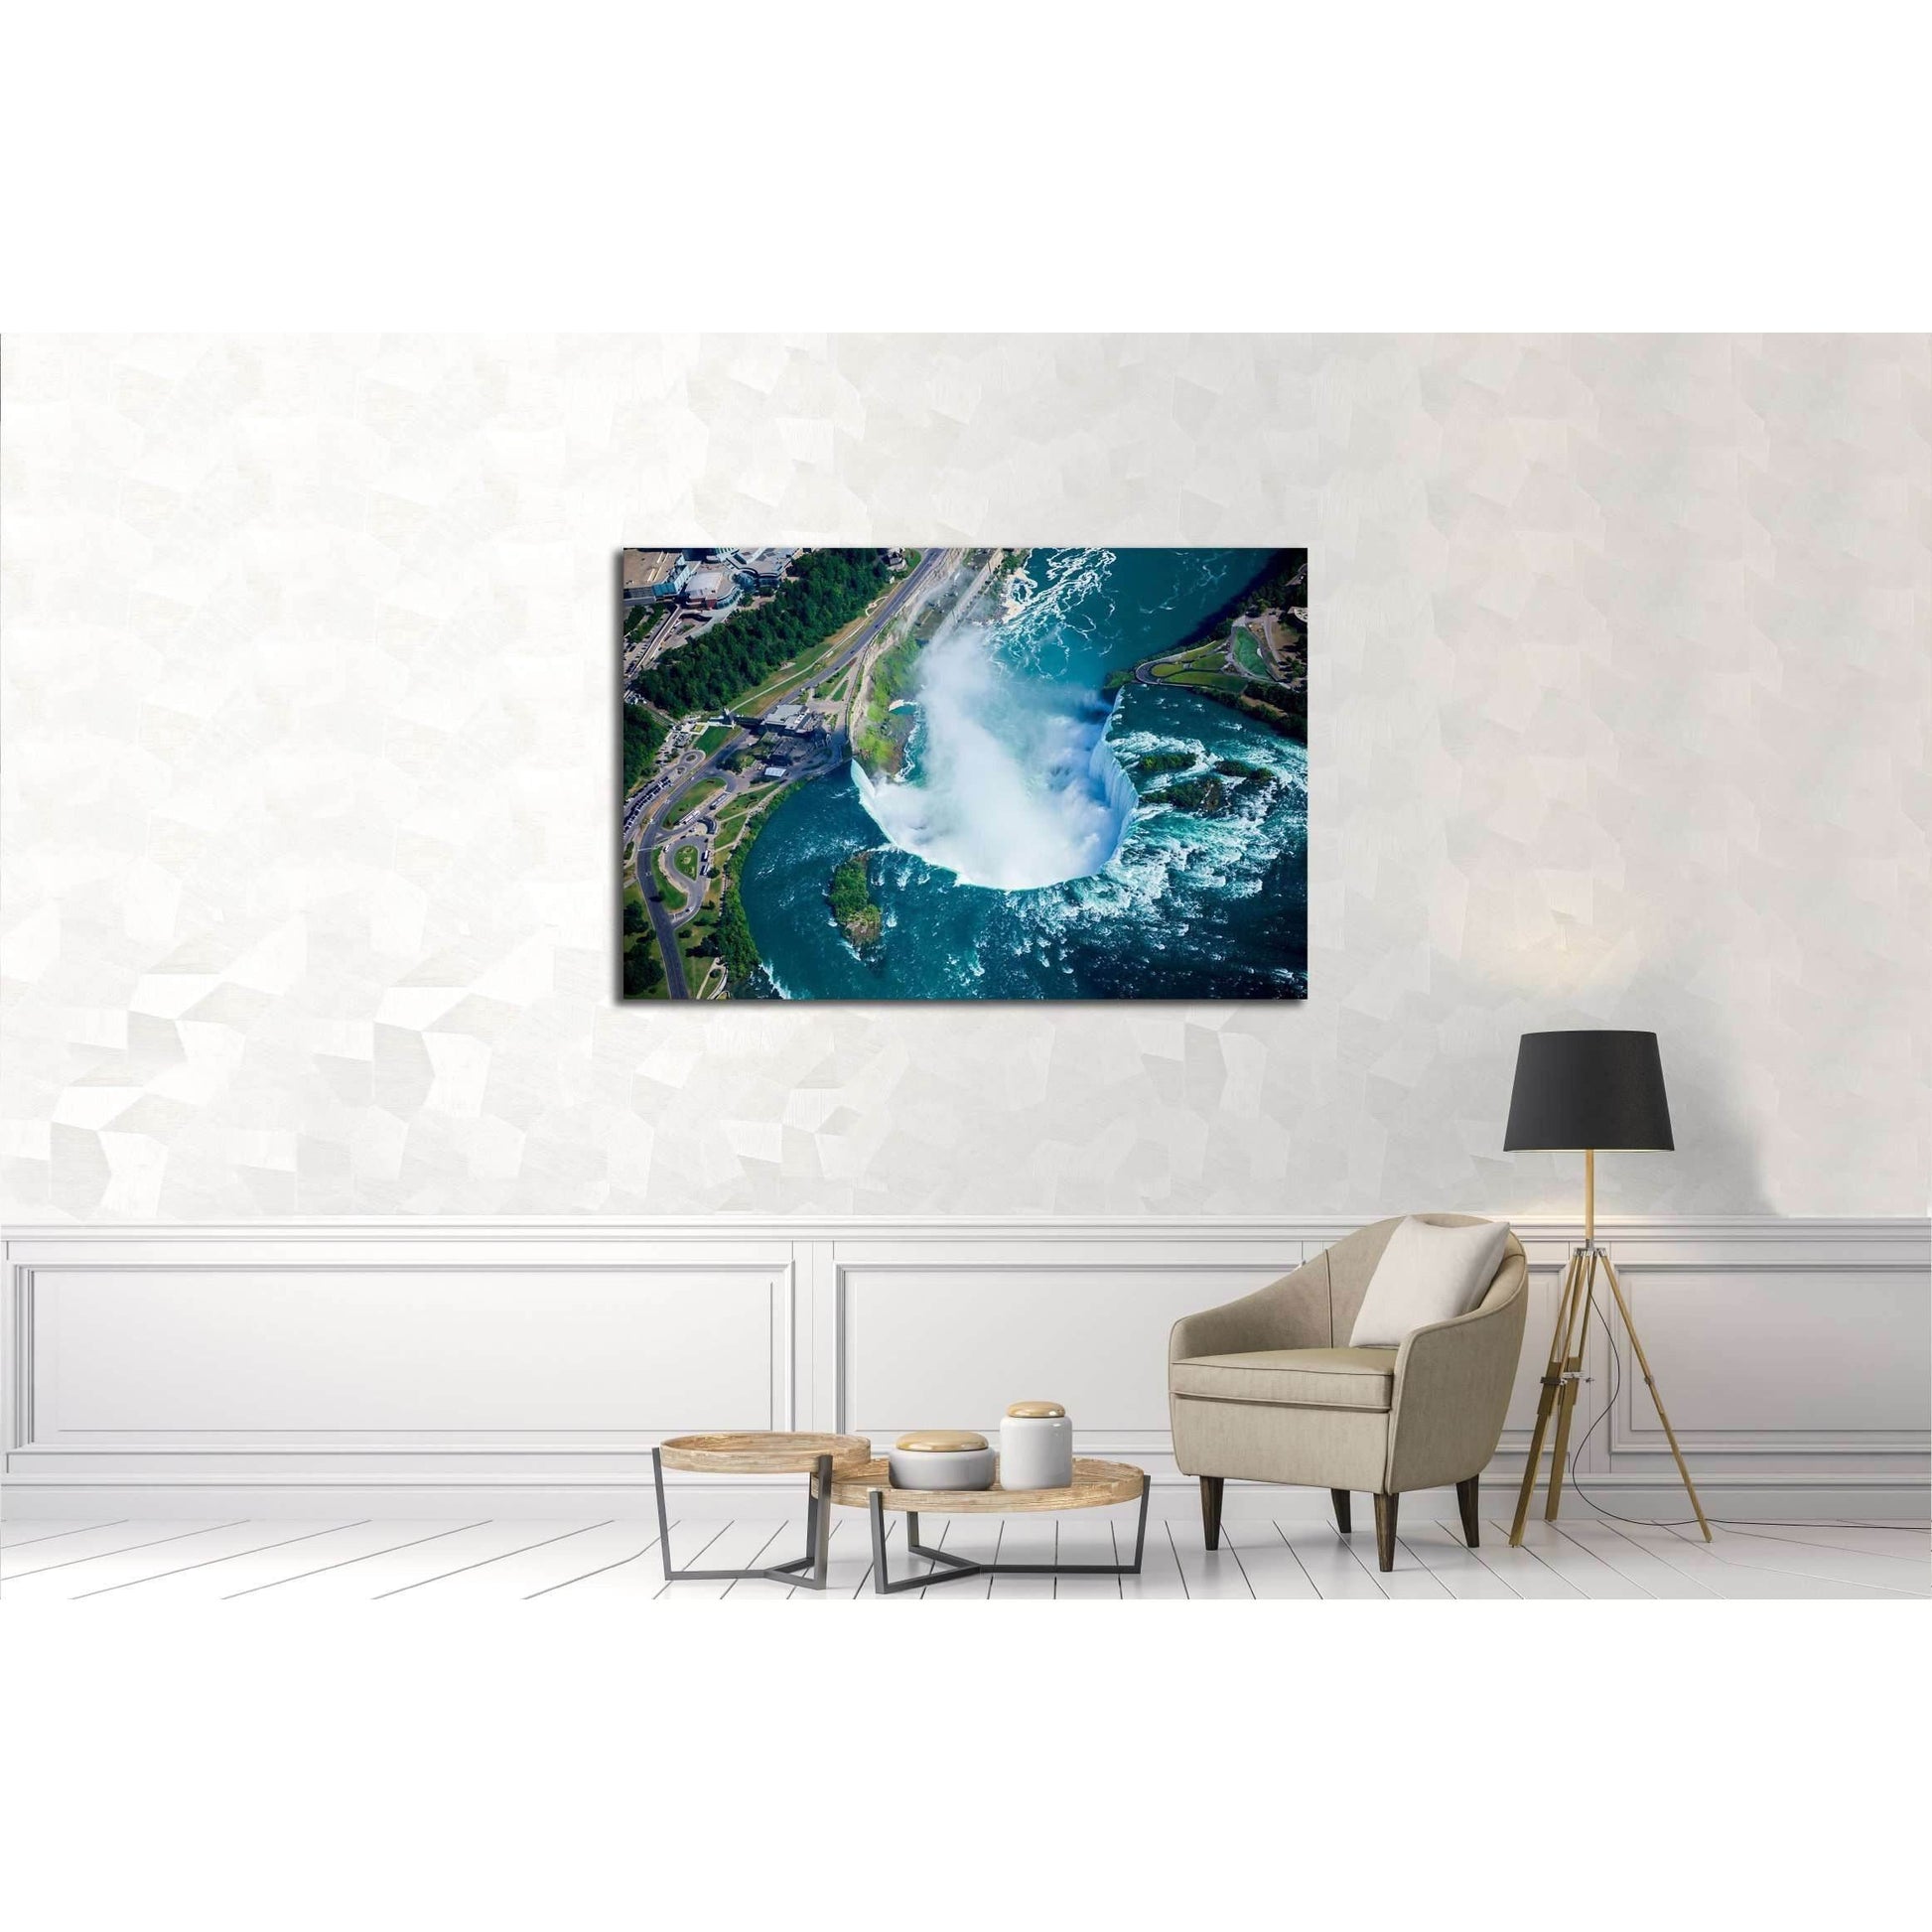 Niagara falls, Canadian side. Ontario, Canada №2914 Ready to Hang Canvas PrintThis canvas print captures the awe-inspiring power of Niagara Falls from a bird's-eye view, highlighting the majestic waterfall's immense scale and the charming blues of the rus